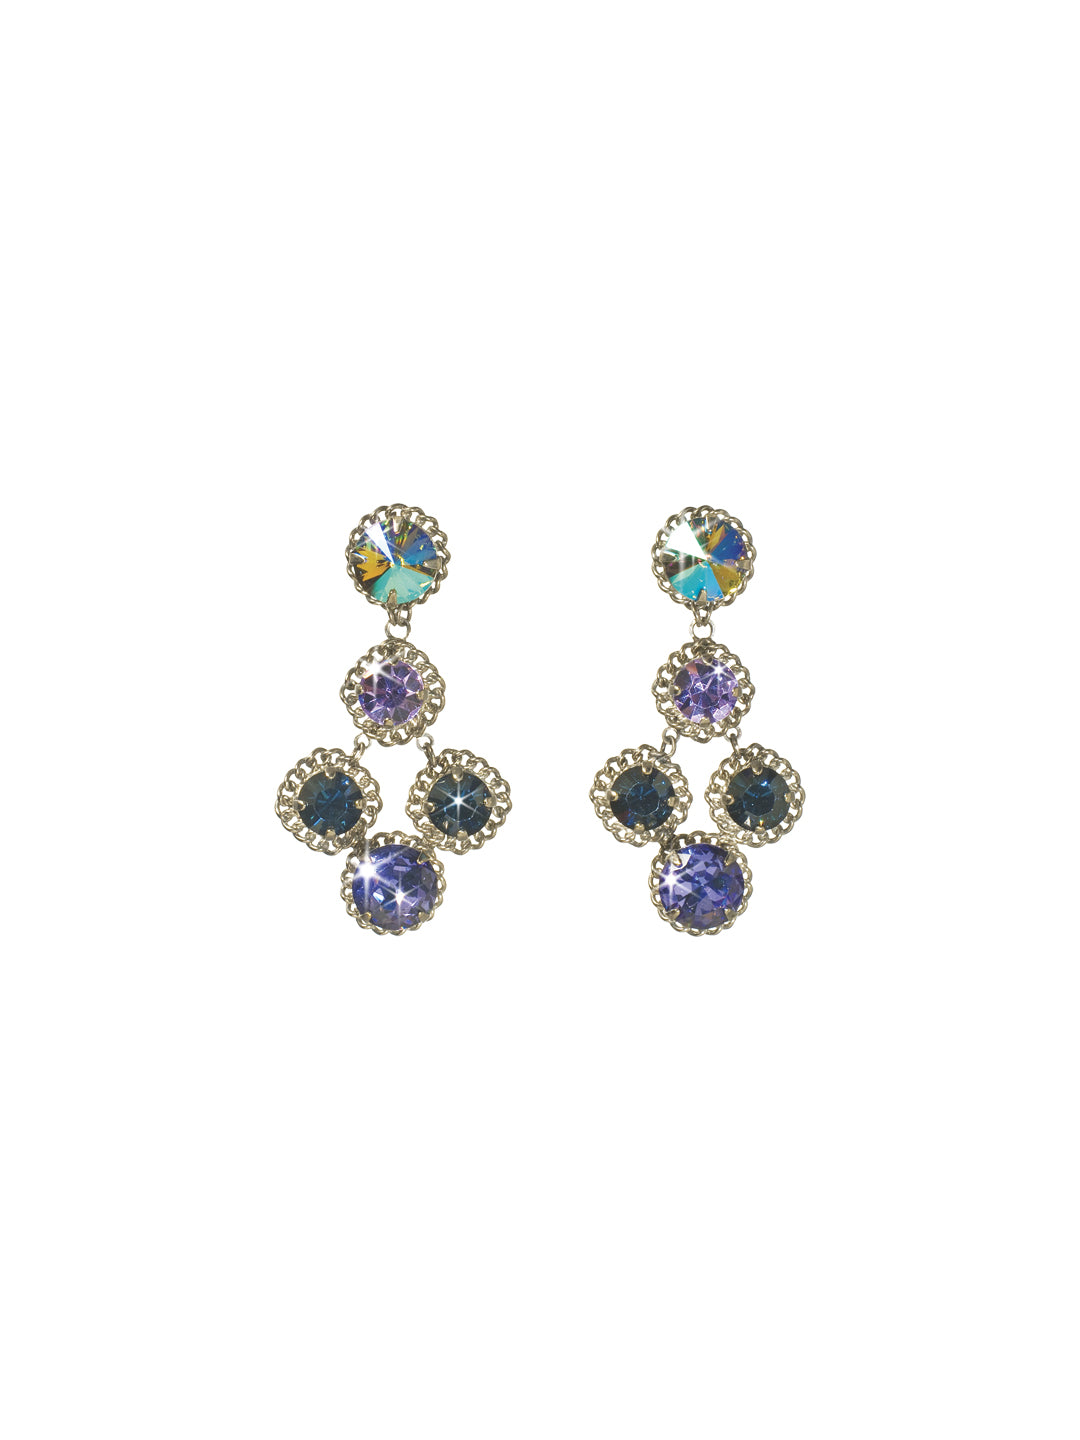 Too Hot To Stop Earring - ECN2ASHY - These earrings have style that just doesn't quit! Dangling crystals in a vintage setting will see any wardrobe through the Holiday season and beyond. From Sorrelli's Hydrangea collection in our Antique Silver-tone finish.